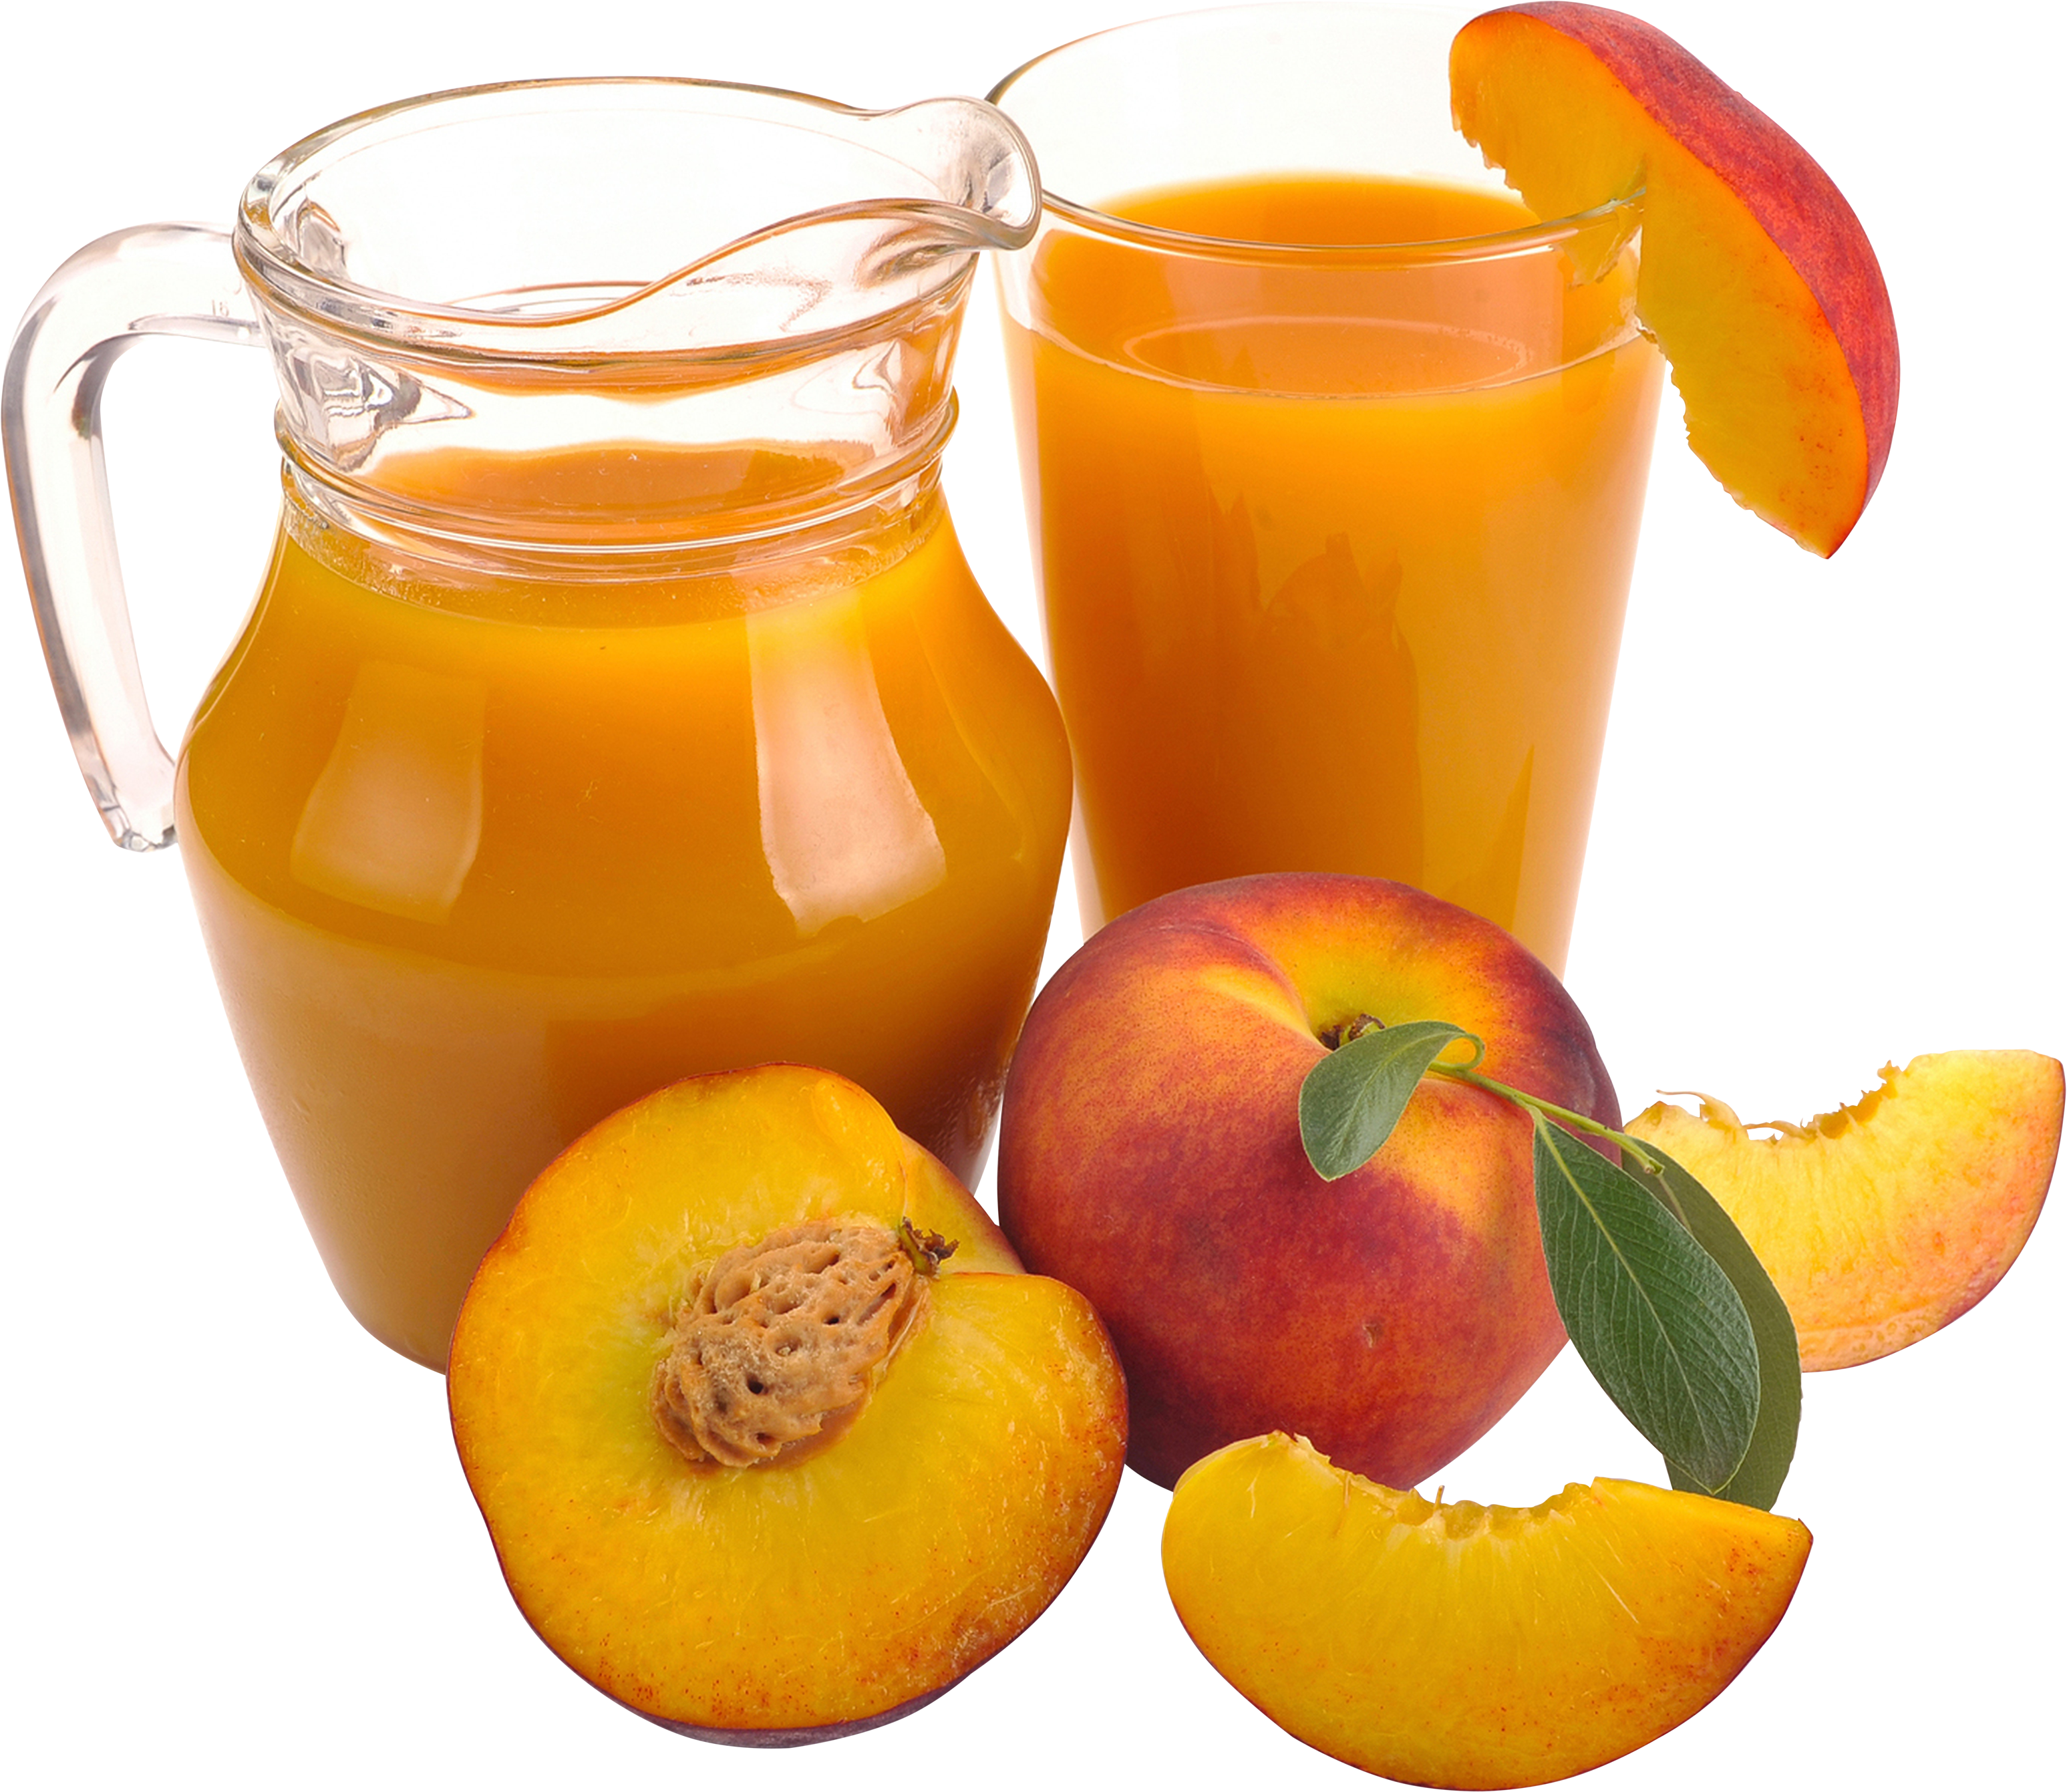 Peaches with Juice